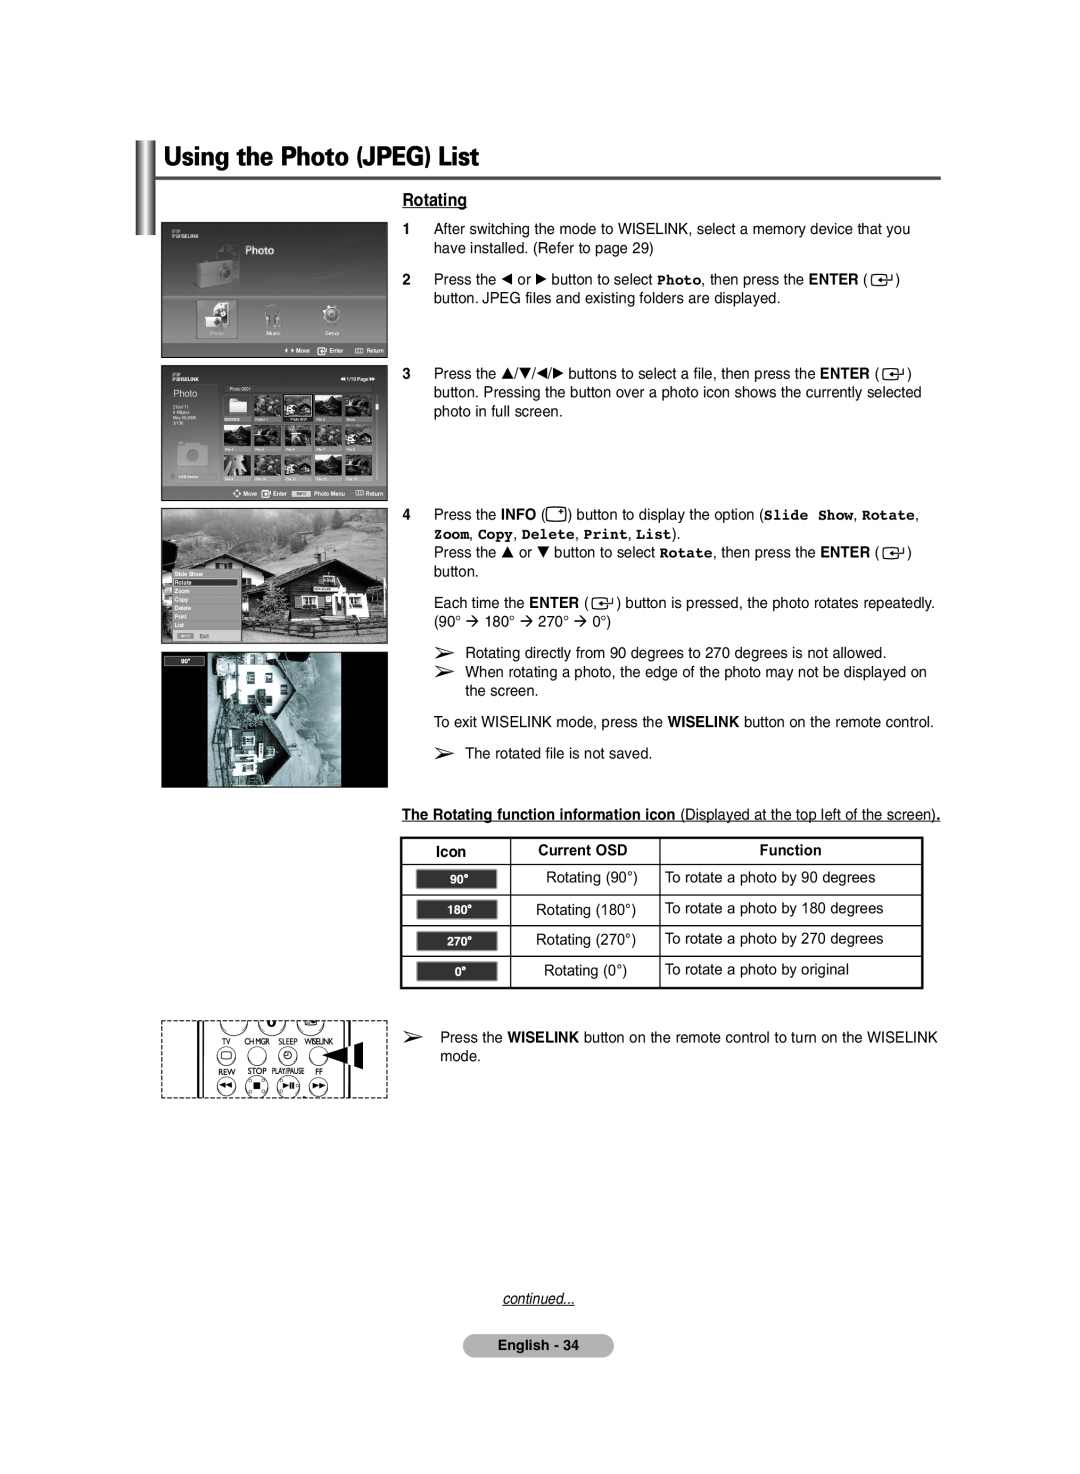 Samsung PDP-TELEVISION manual Rotating, Zoom, Copy, Delete, Print, List, Current OSD, Using the Photo JPEG List, continued 